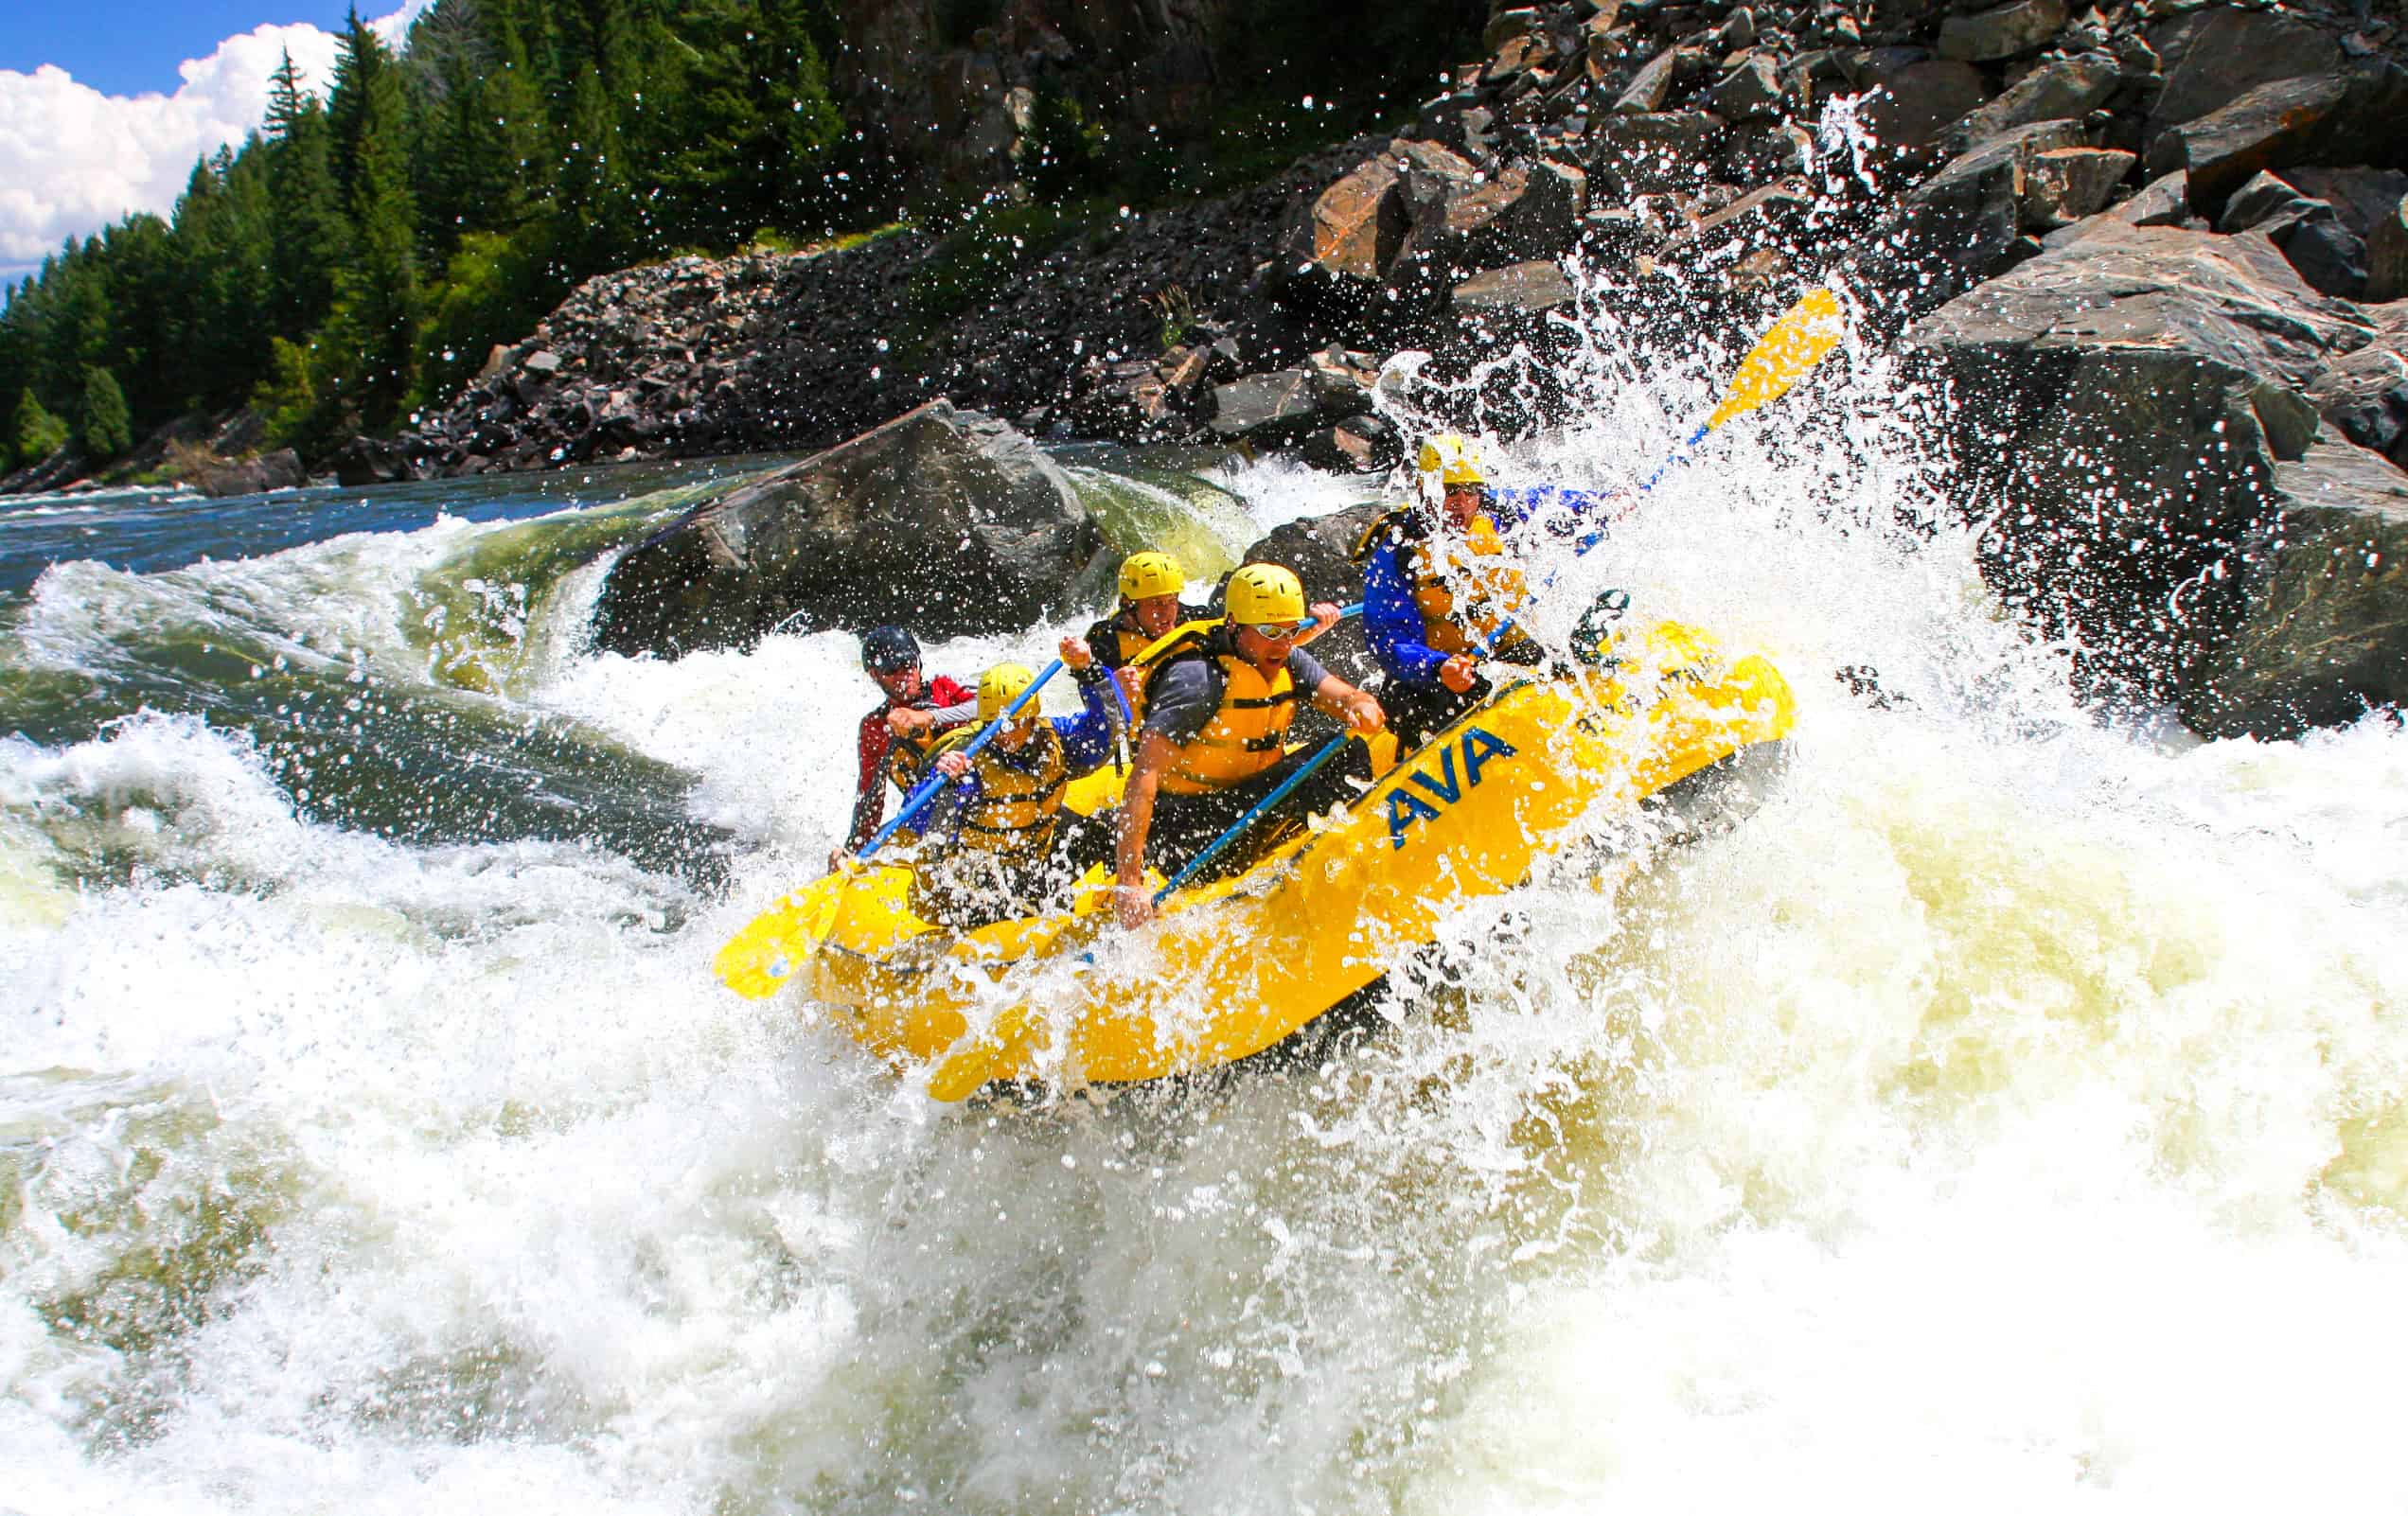 A group of rafters smash into a wave of whitewater